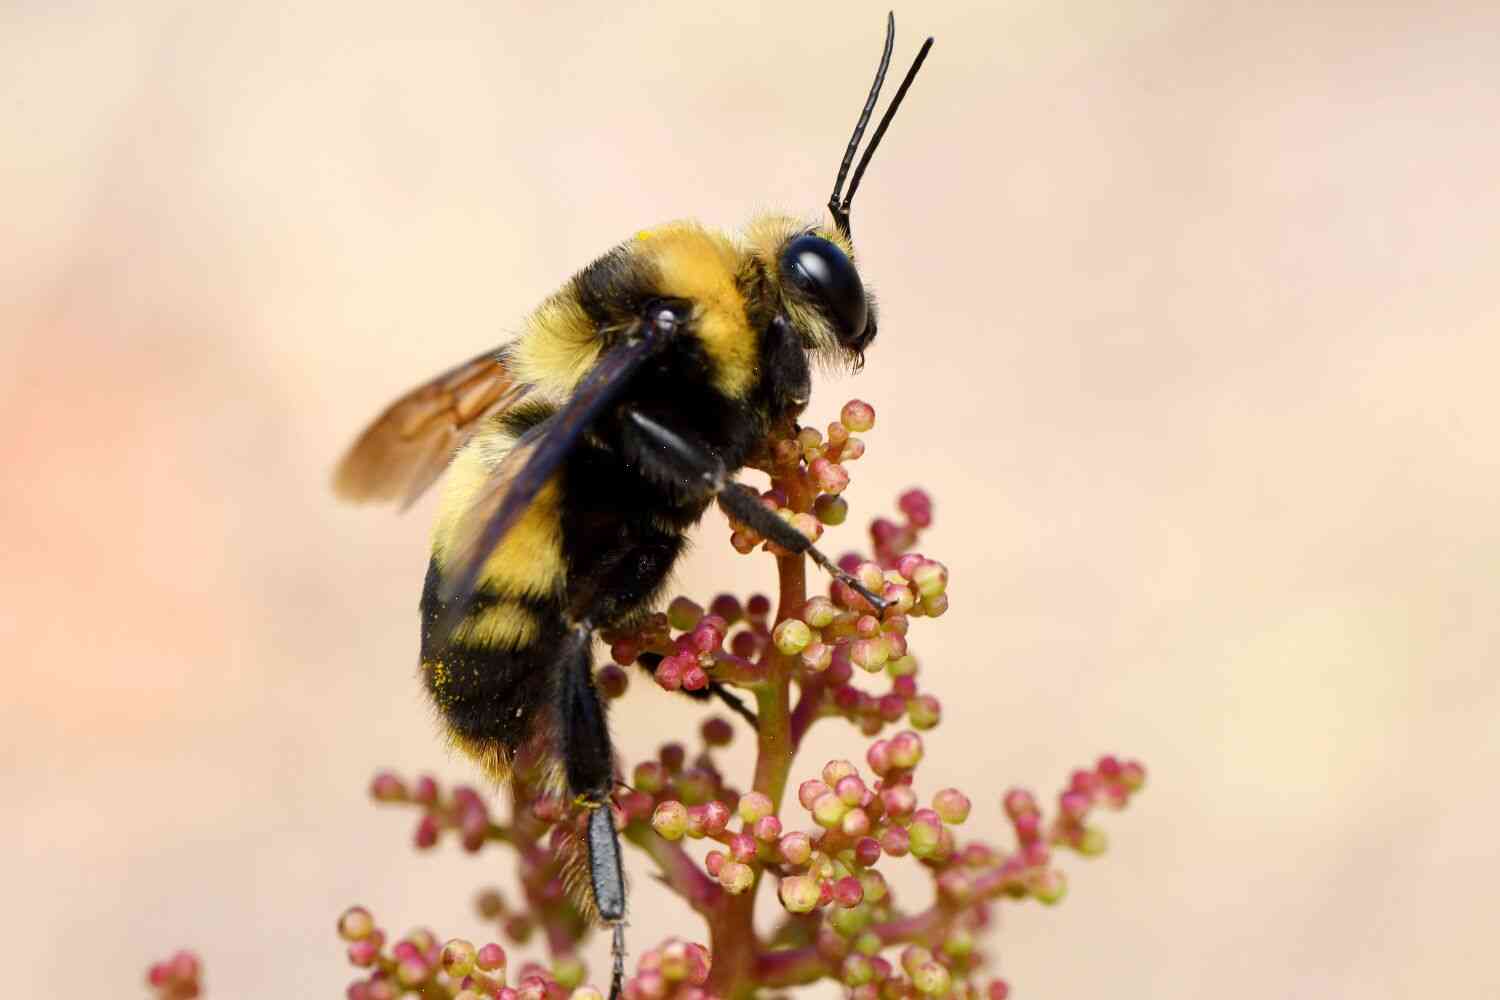 California's endangered bumblebees sue for the first time